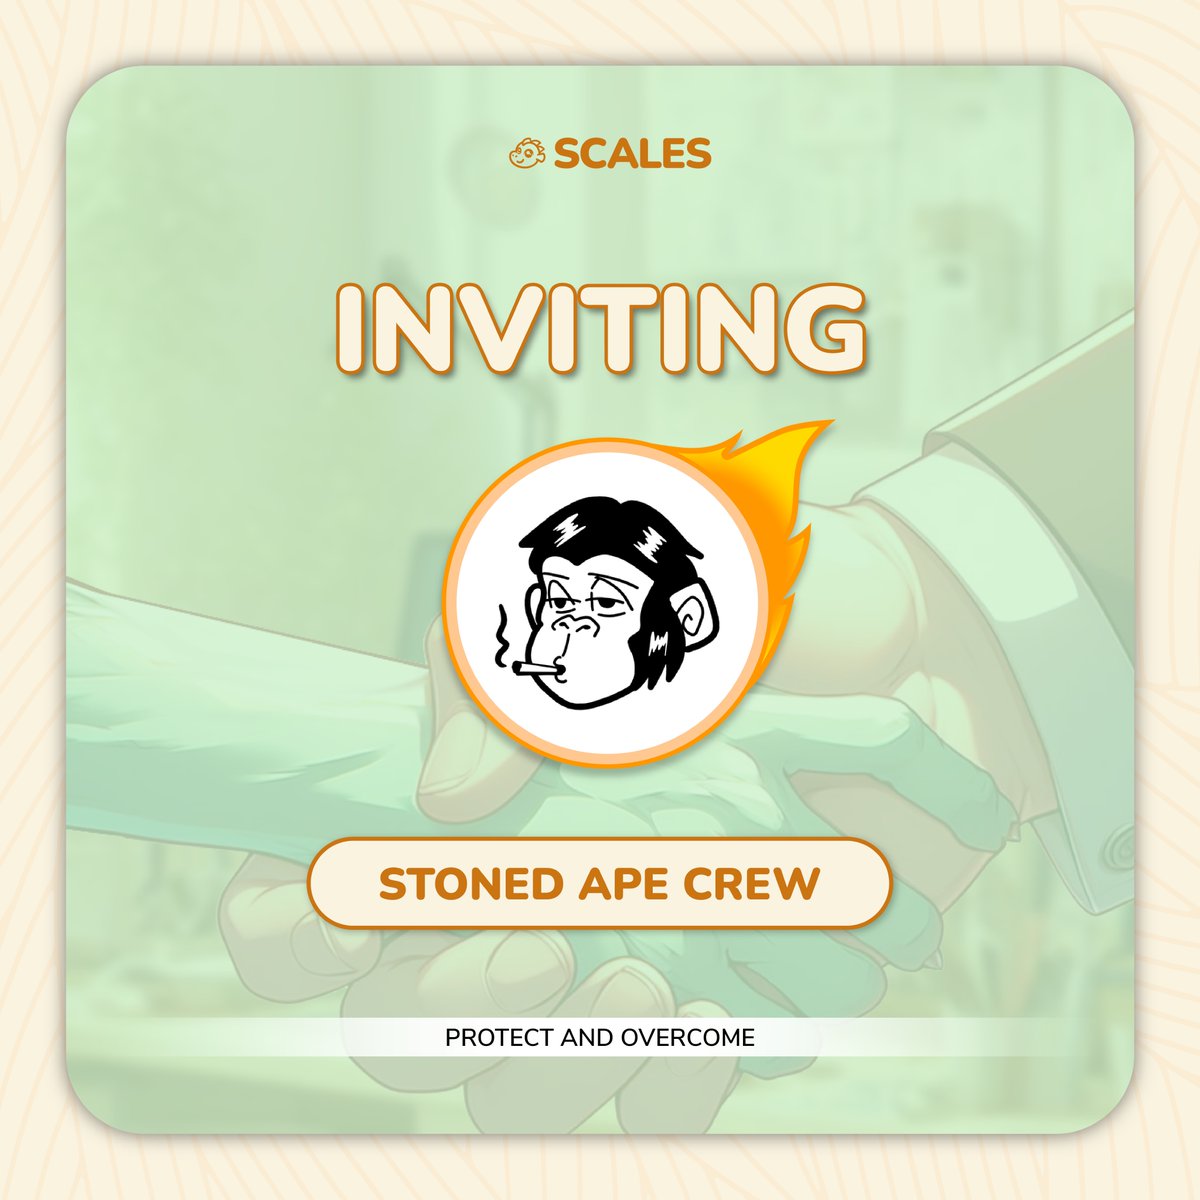 We would like to formally invite the @StonedApeCrew community to join SCALES on our ventures in wallet security💚 Join our Discord now to get Protected and secure your $SCALES airdrop